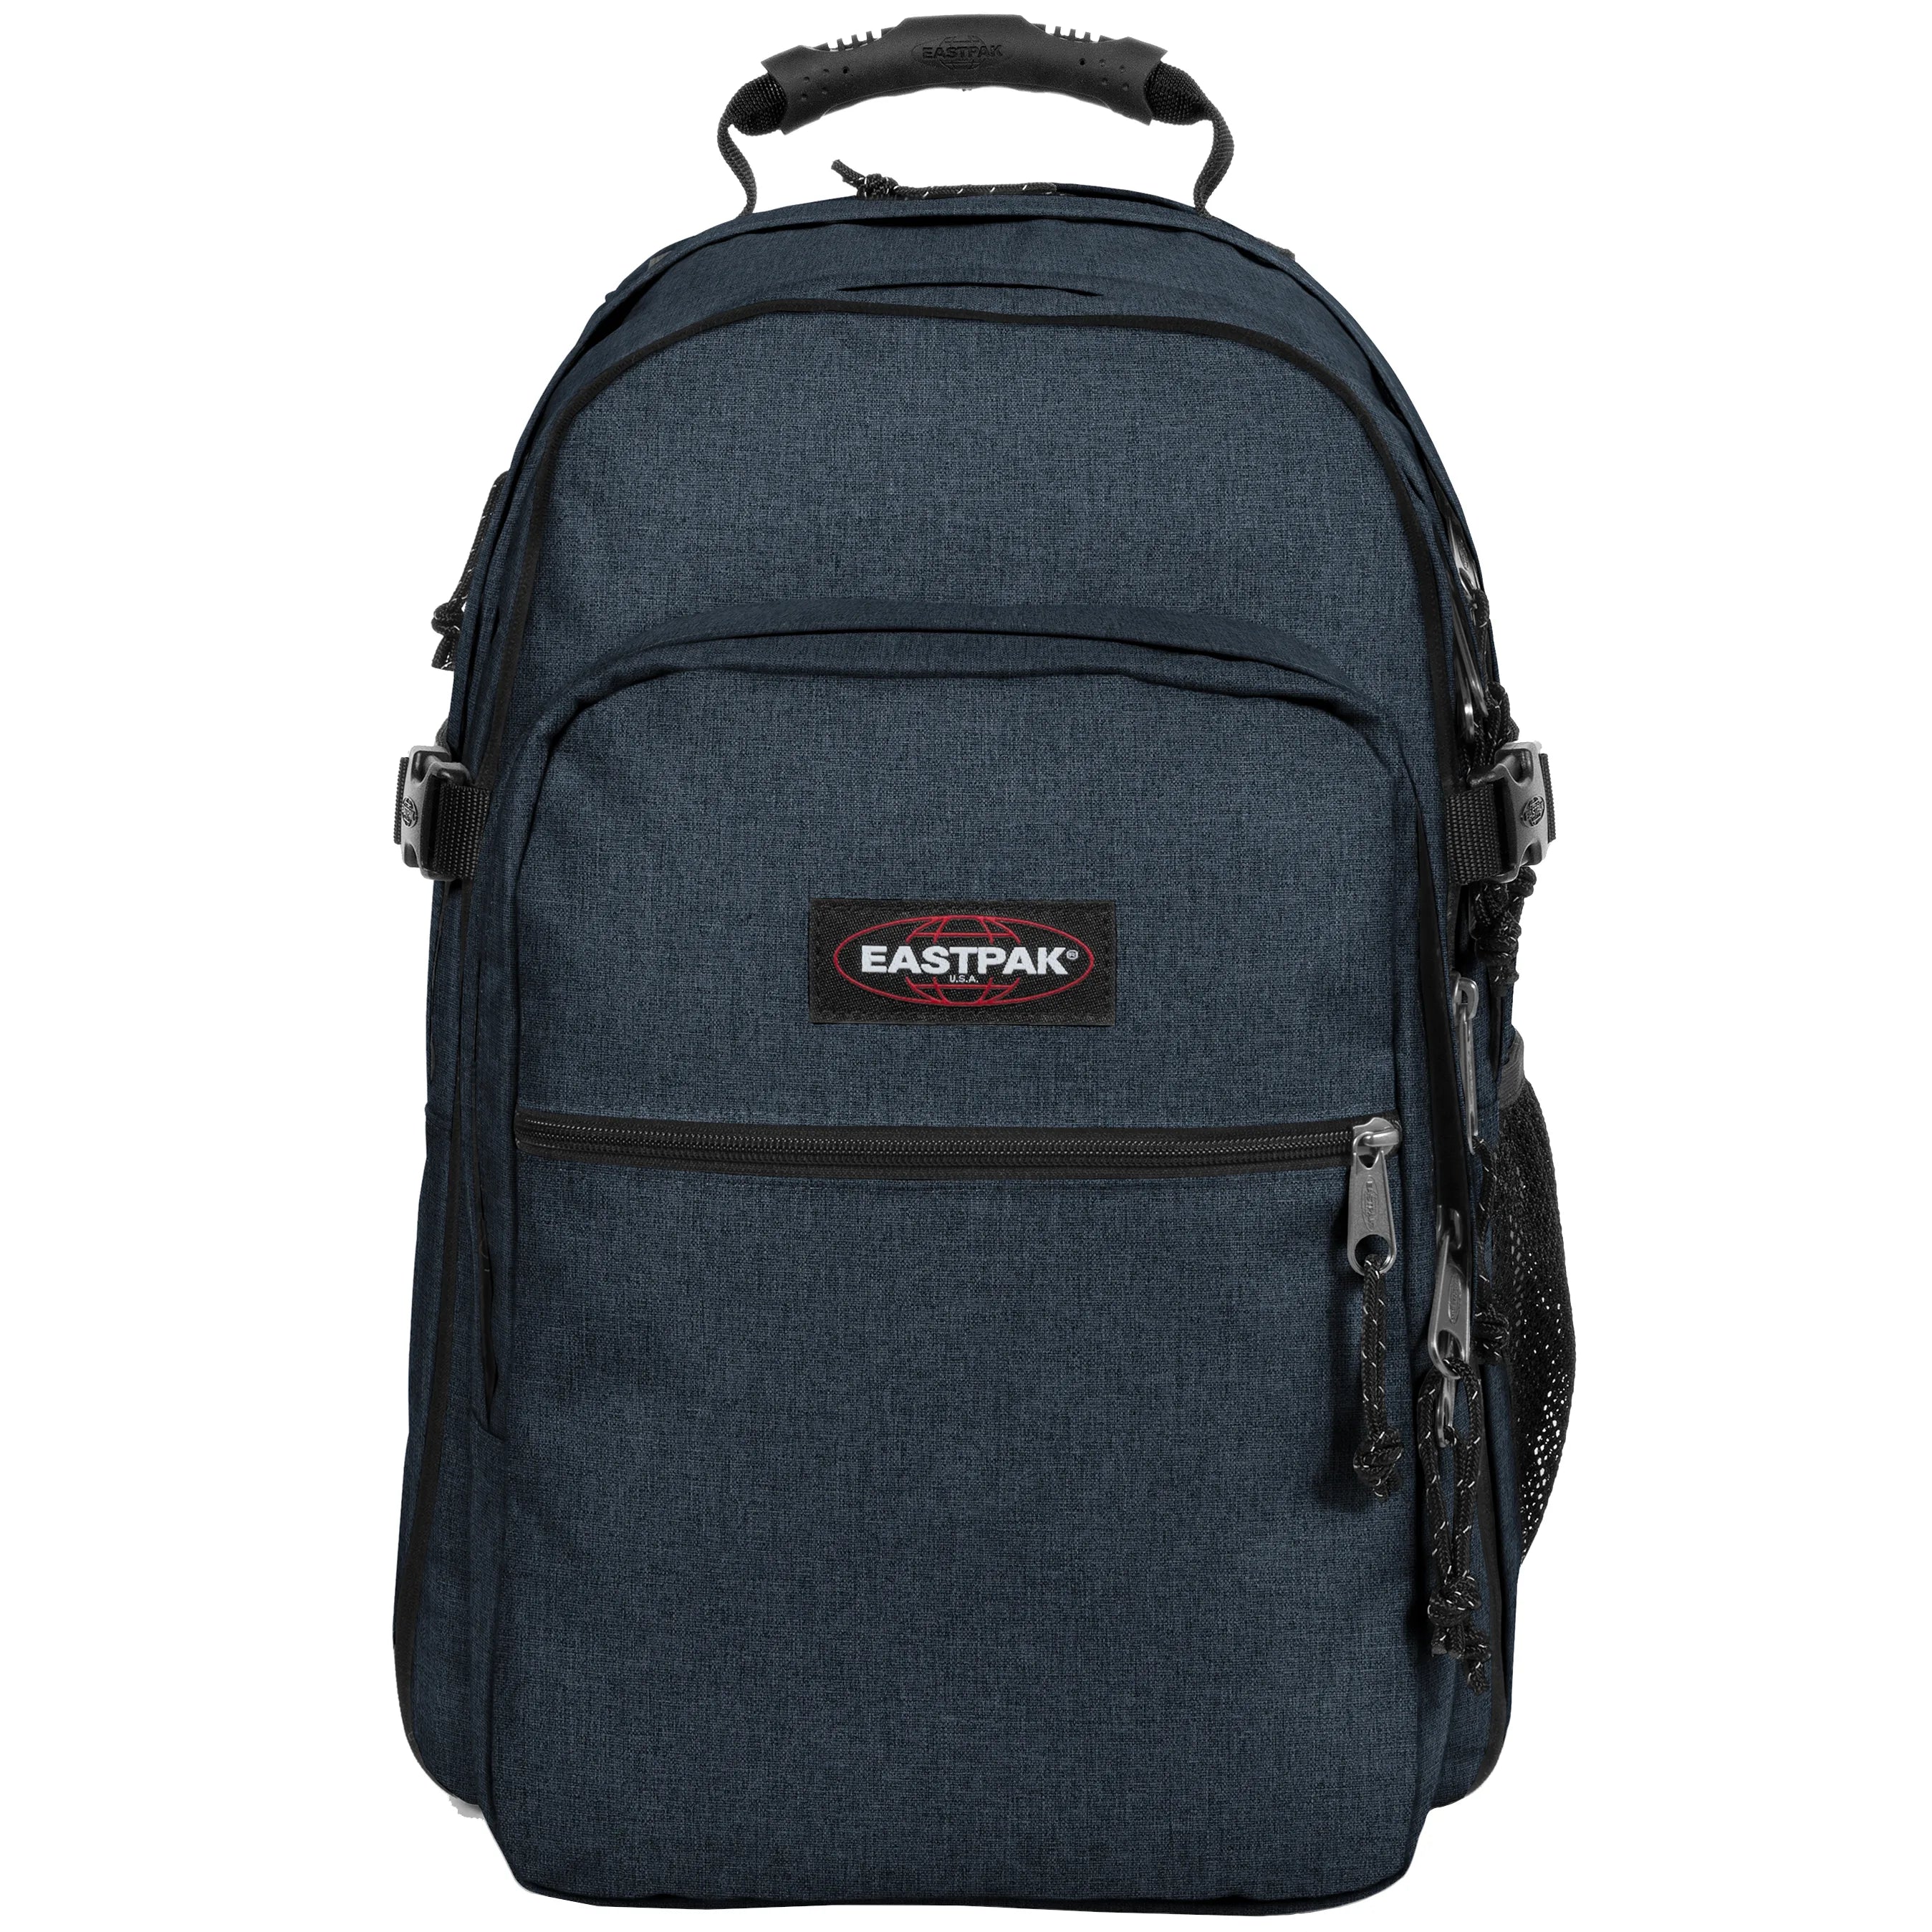 Eastpak Authentic Re-Check Tutor backpack with laptop compartment 48 cm - triple denim